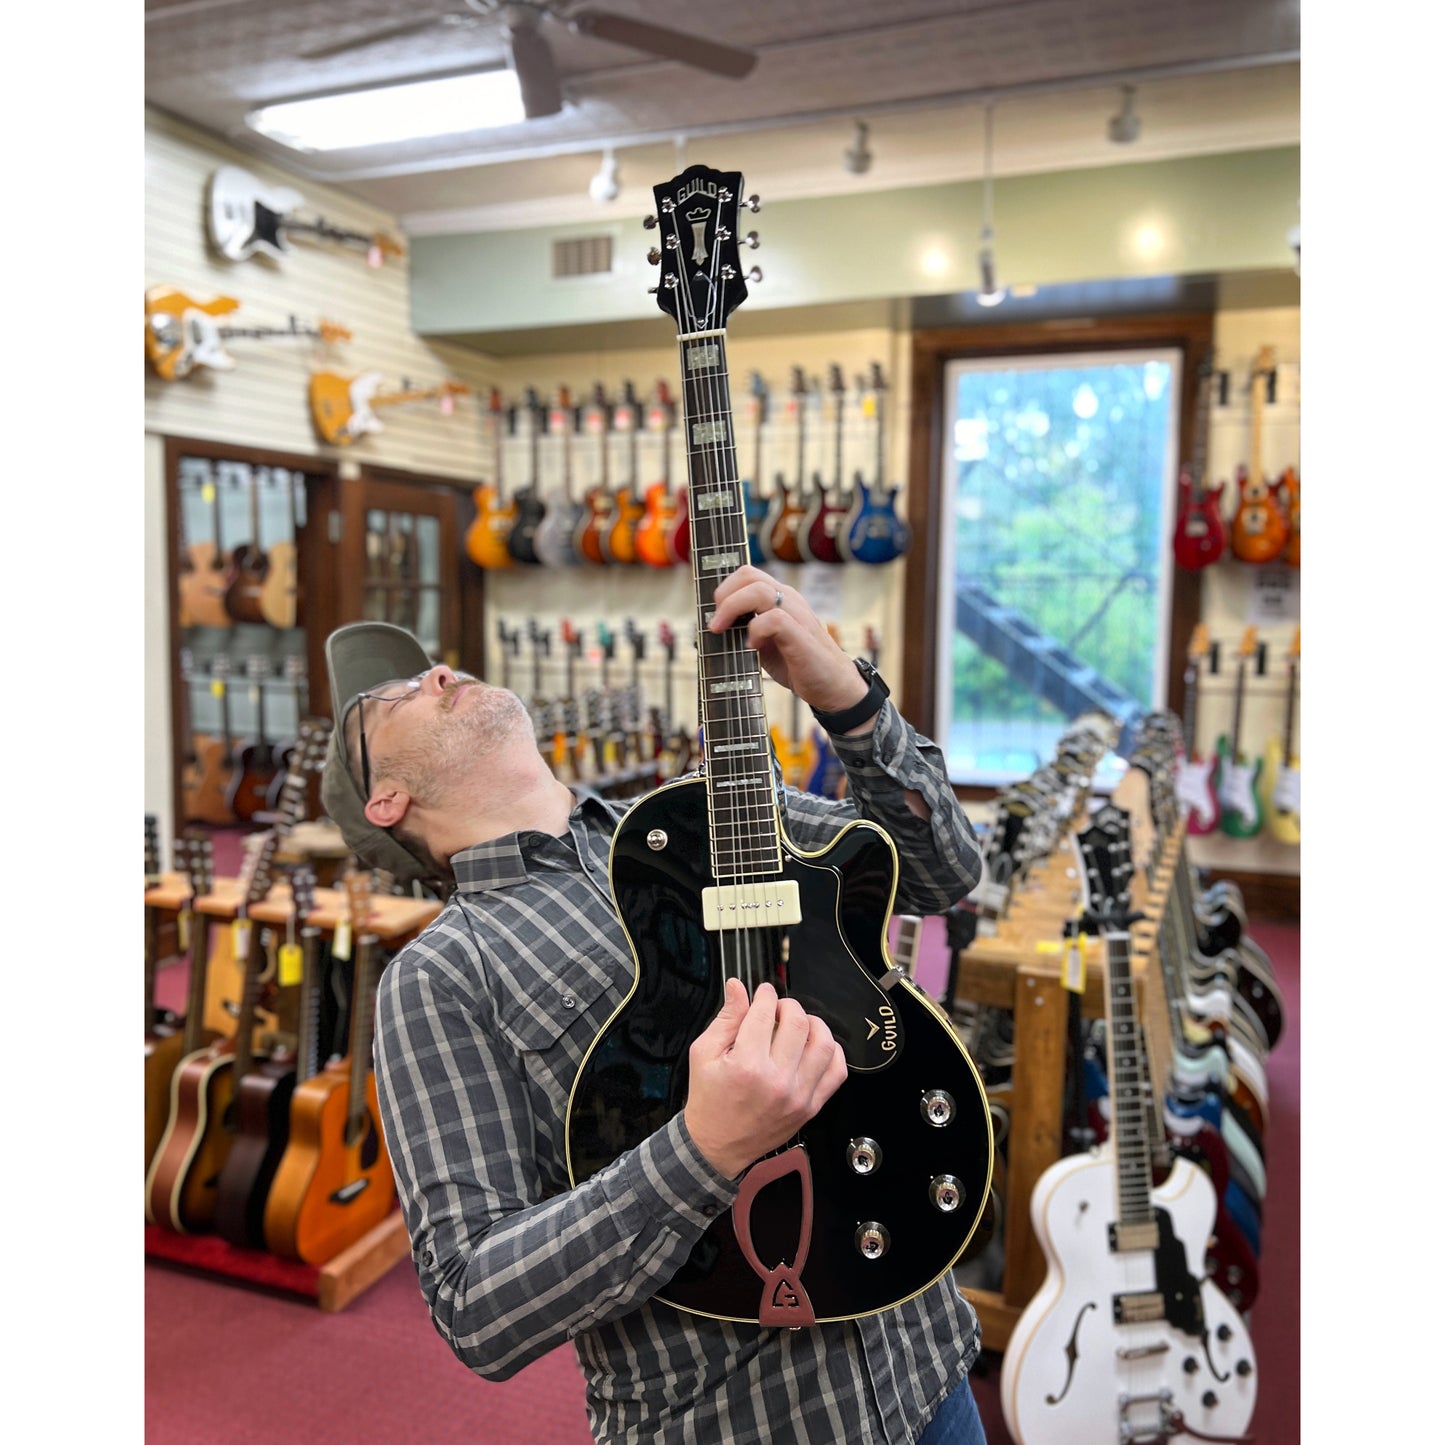 Guild Newark St. Collection M-75 Aristocrat Hollow Body Archtop Guitar, Limited Edition Black Finish